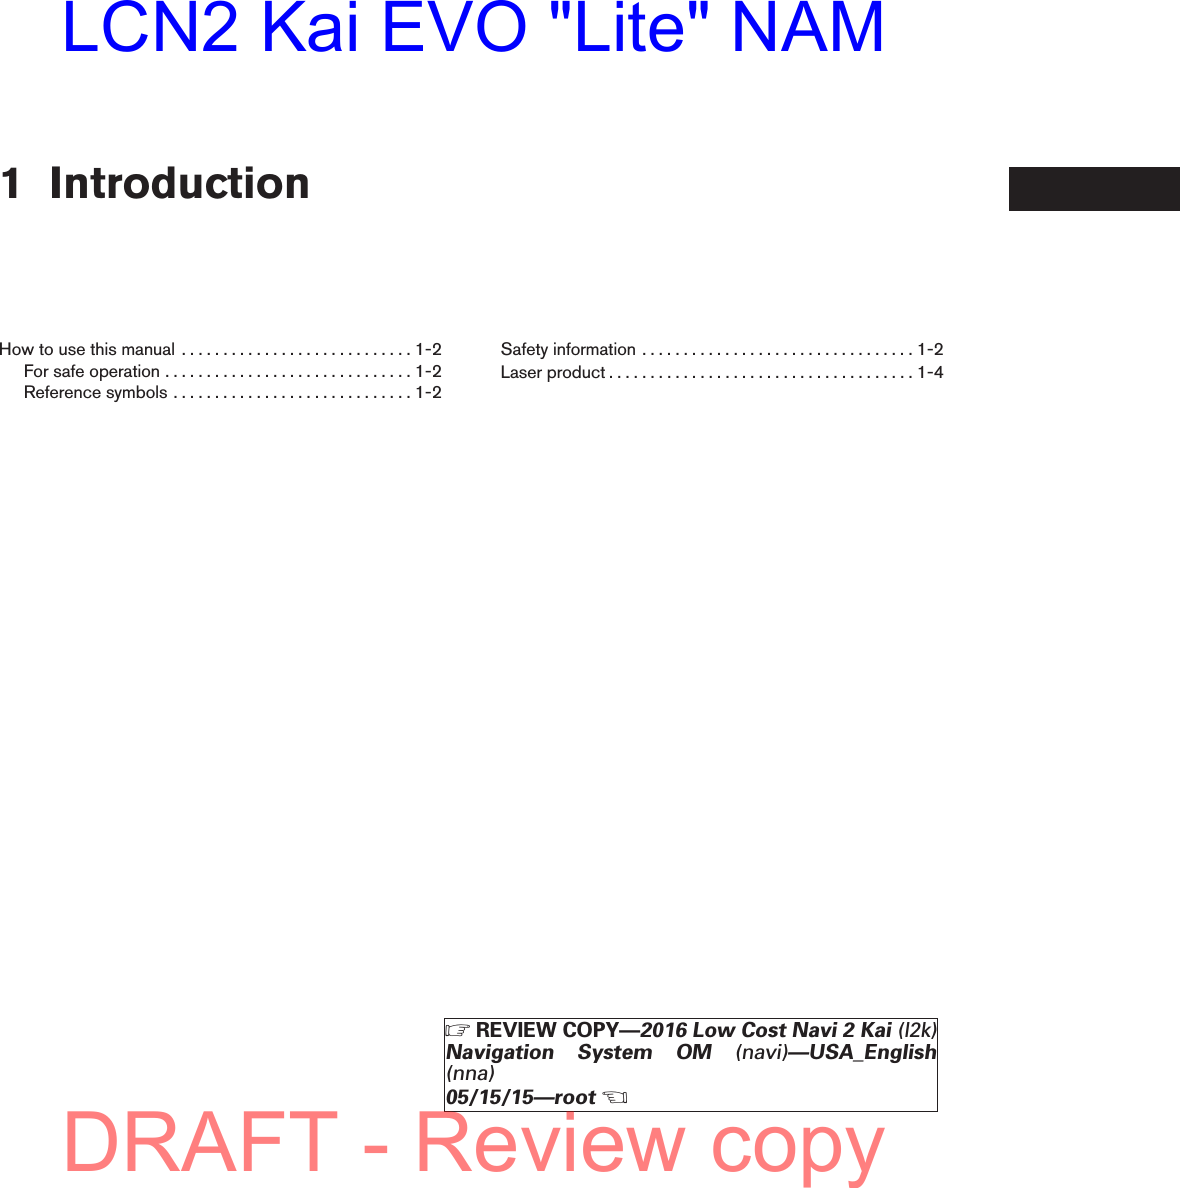 1 IntroductionHowtousethismanual ............................1-2Forsafeoperation..............................1-2Referencesymbols.............................1-2Safetyinformation.................................1-2Laserproduct.....................................1-4ZREVIEW COPY—2016 Low Cost Navi 2 Kai (l2k)Navigation System OM (navi)—USA_English(nna)05/15/15—rootXDRAFT - Review copyLCN2 Kai EVO &quot;Lite&quot; NAM